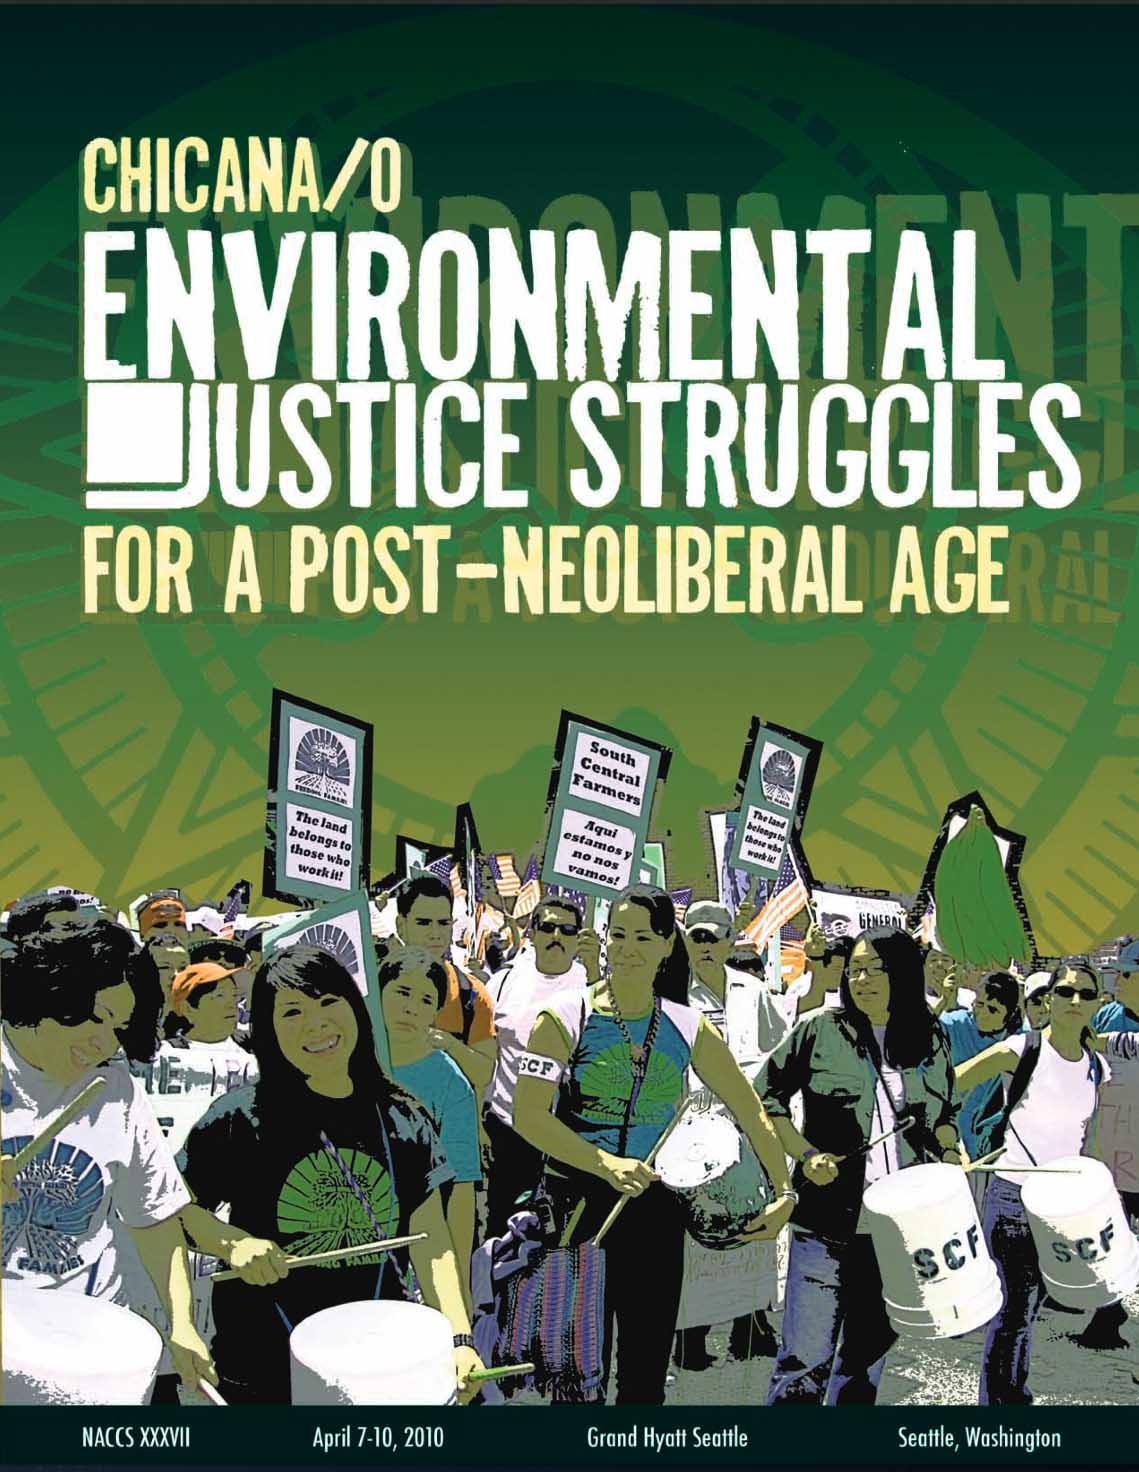 2010: Chicana/o Environmental Justice Struggles for a Post-Neoliberal Age